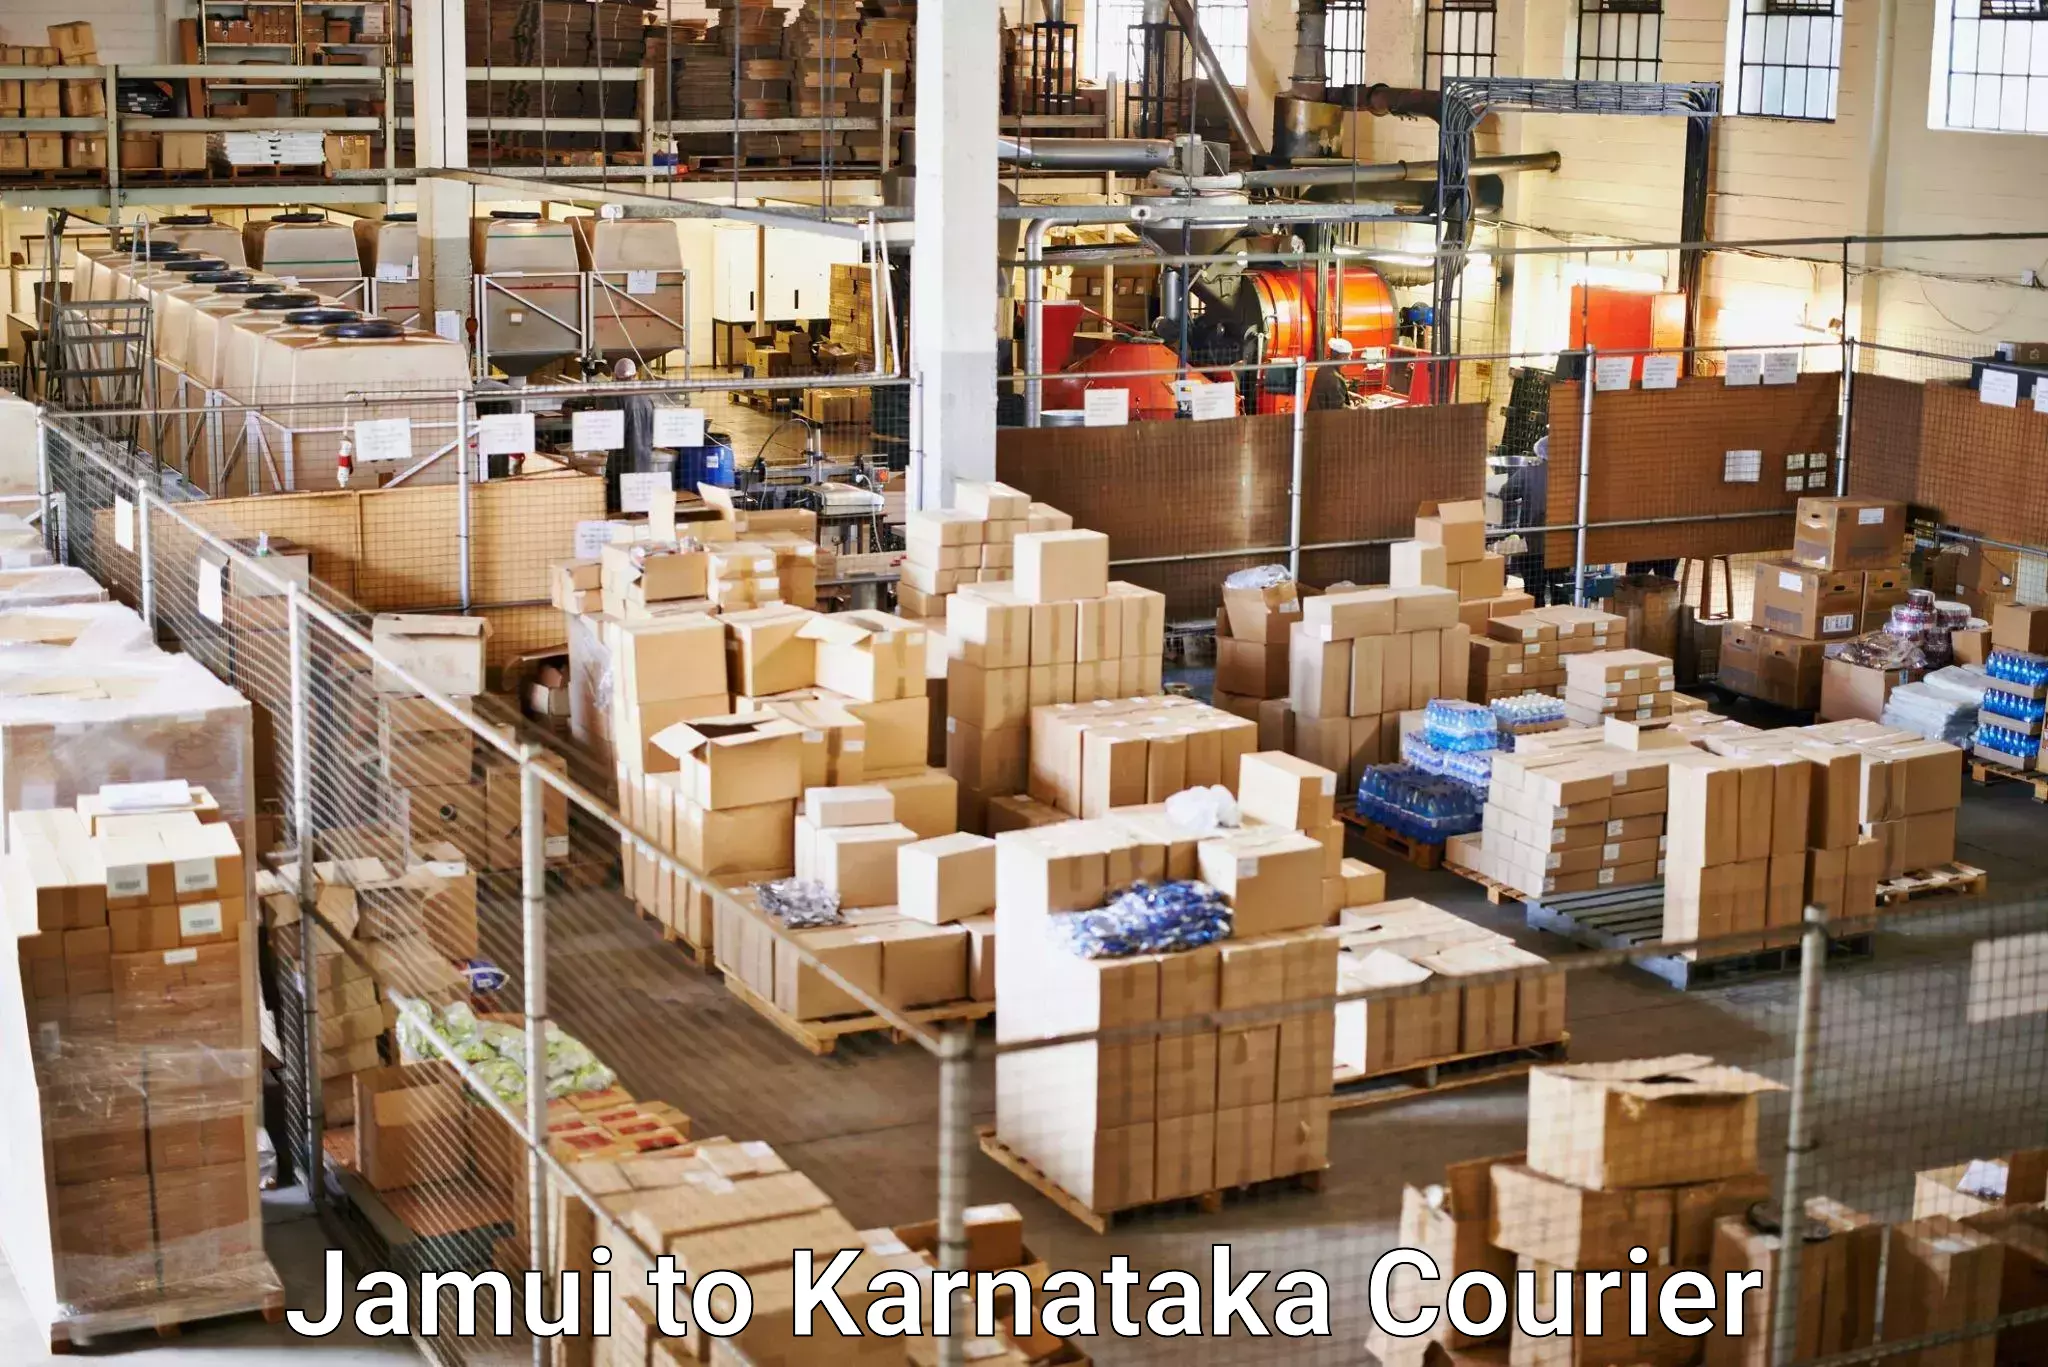 Flexible delivery schedules Jamui to Chikkamagaluru